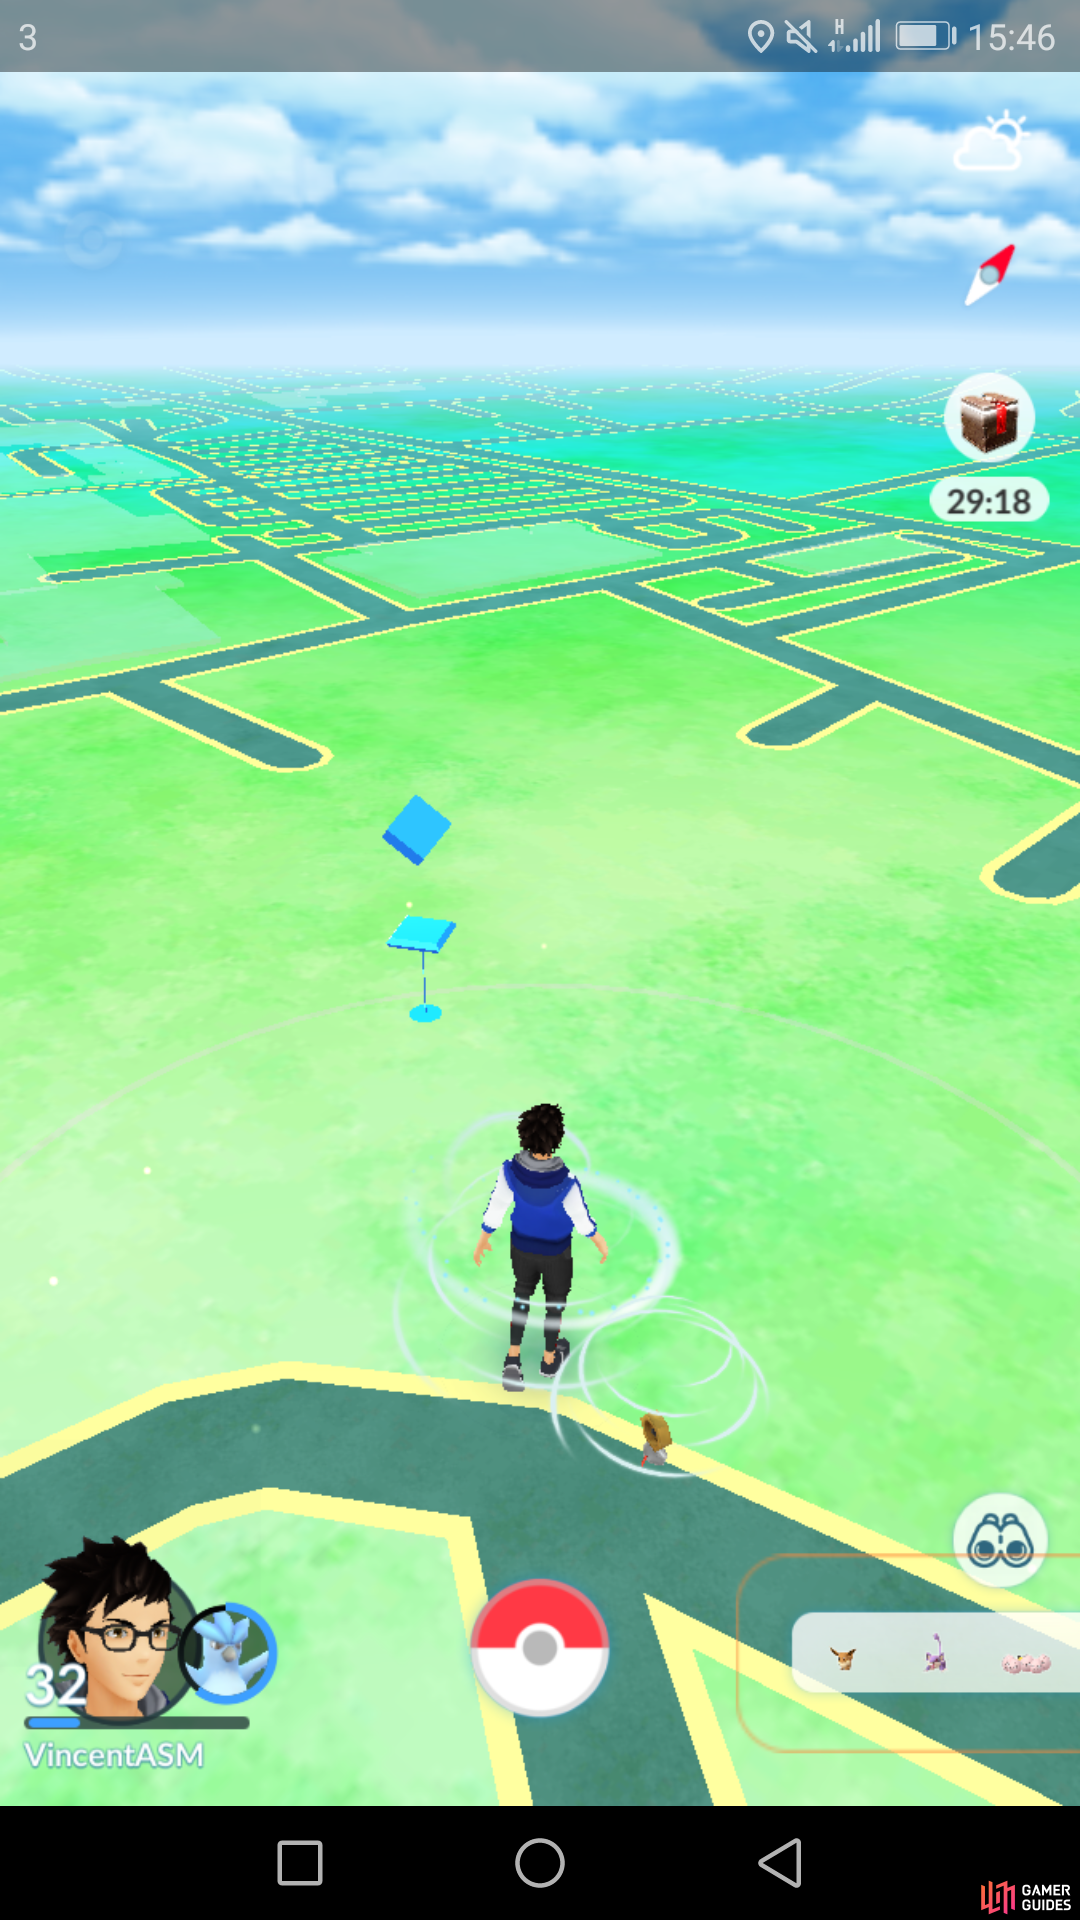 How to get a Mystery Box in Pokémon GO